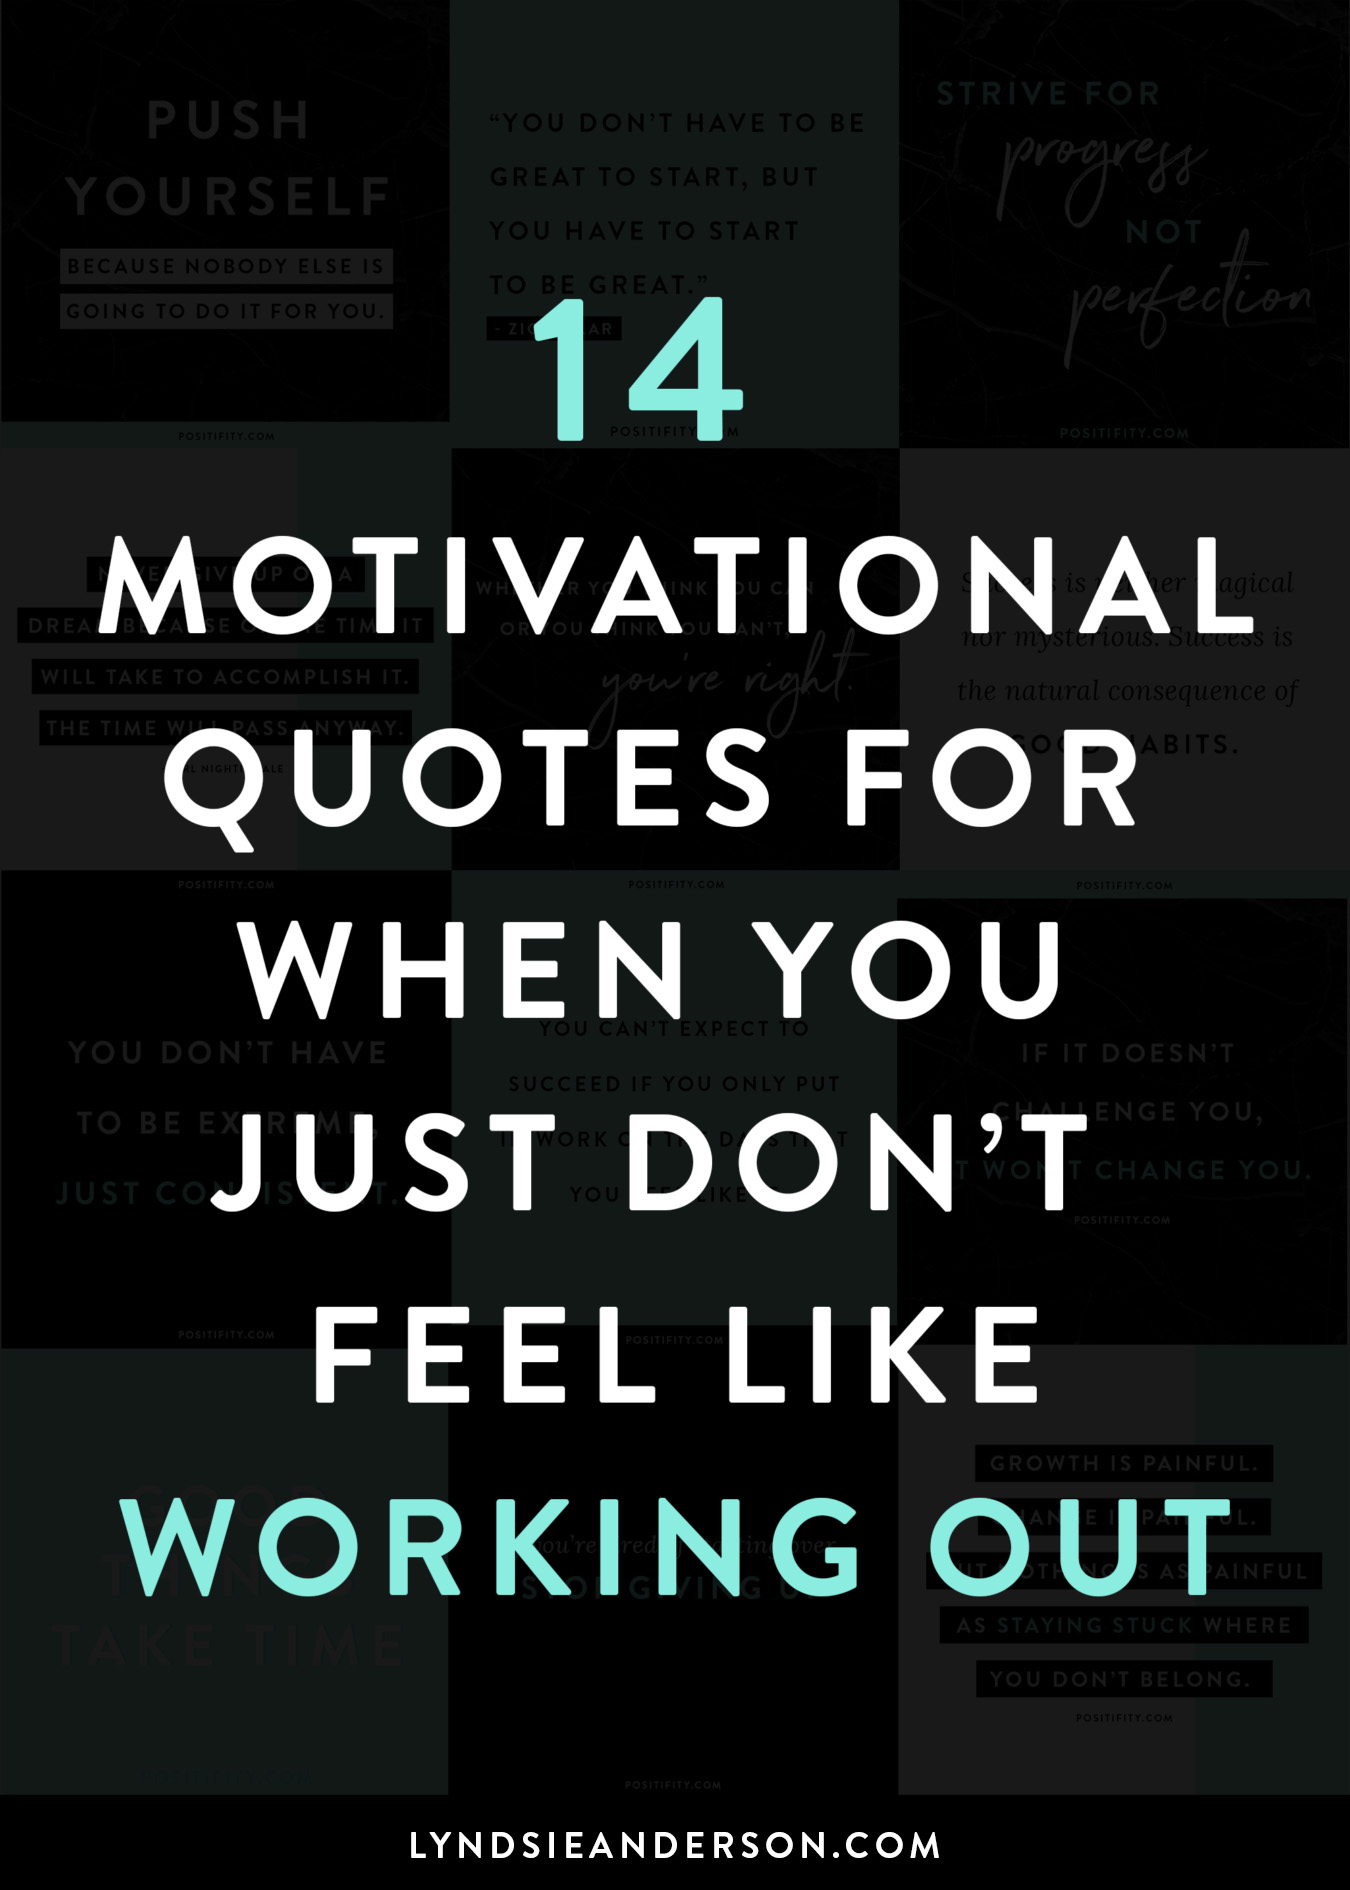 Motivational Quotes for When You Don't Feel Like Working Out